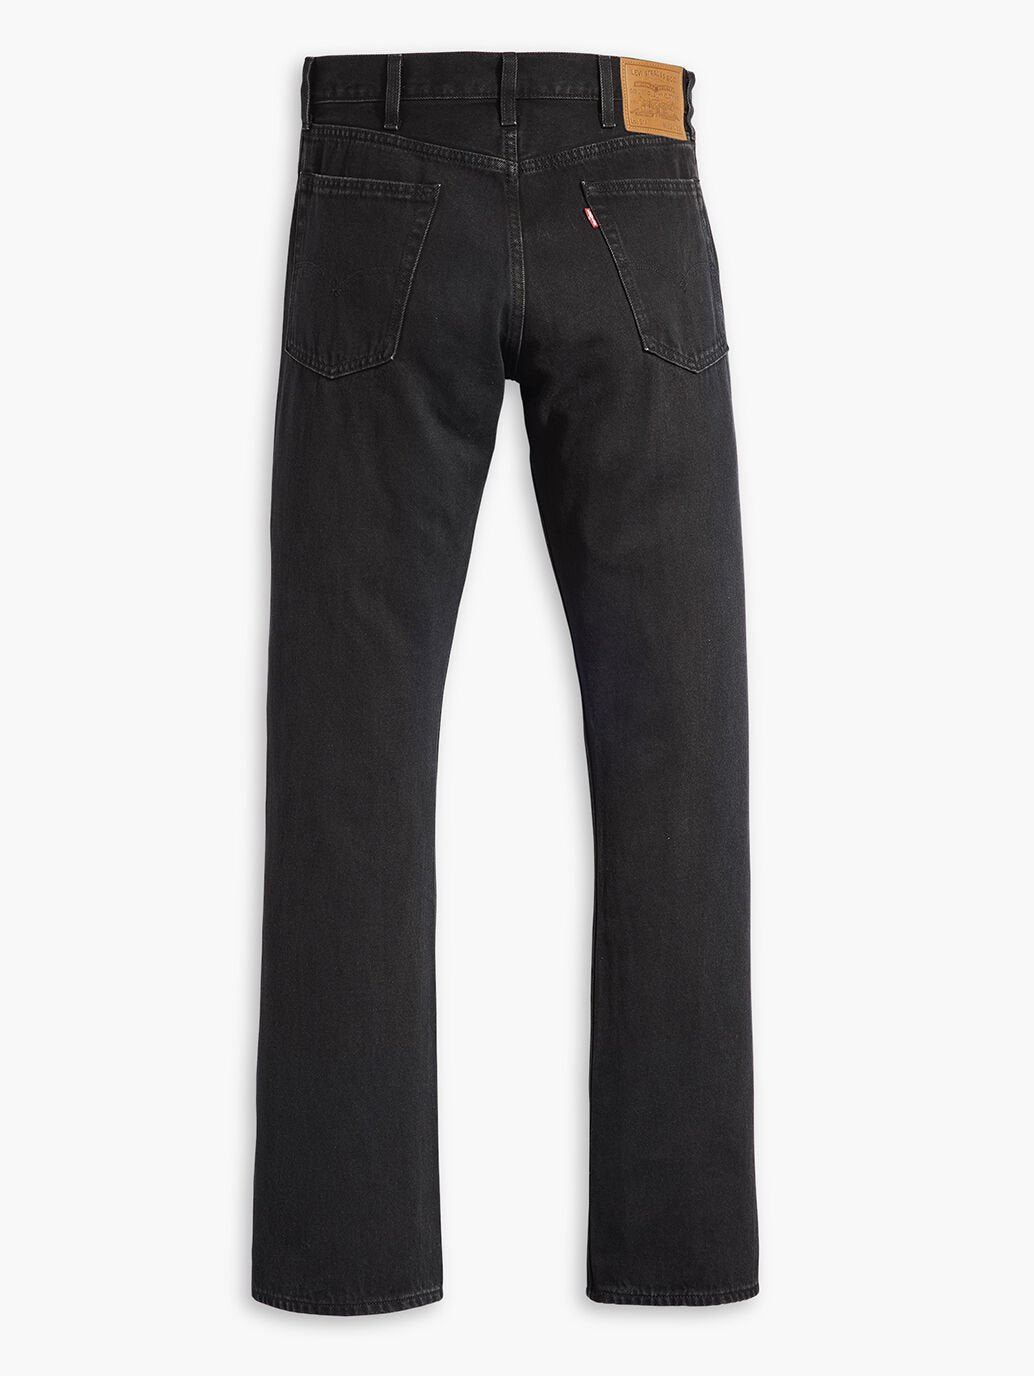 LEVIS 517 Bootcut Welcome To The Rodeo